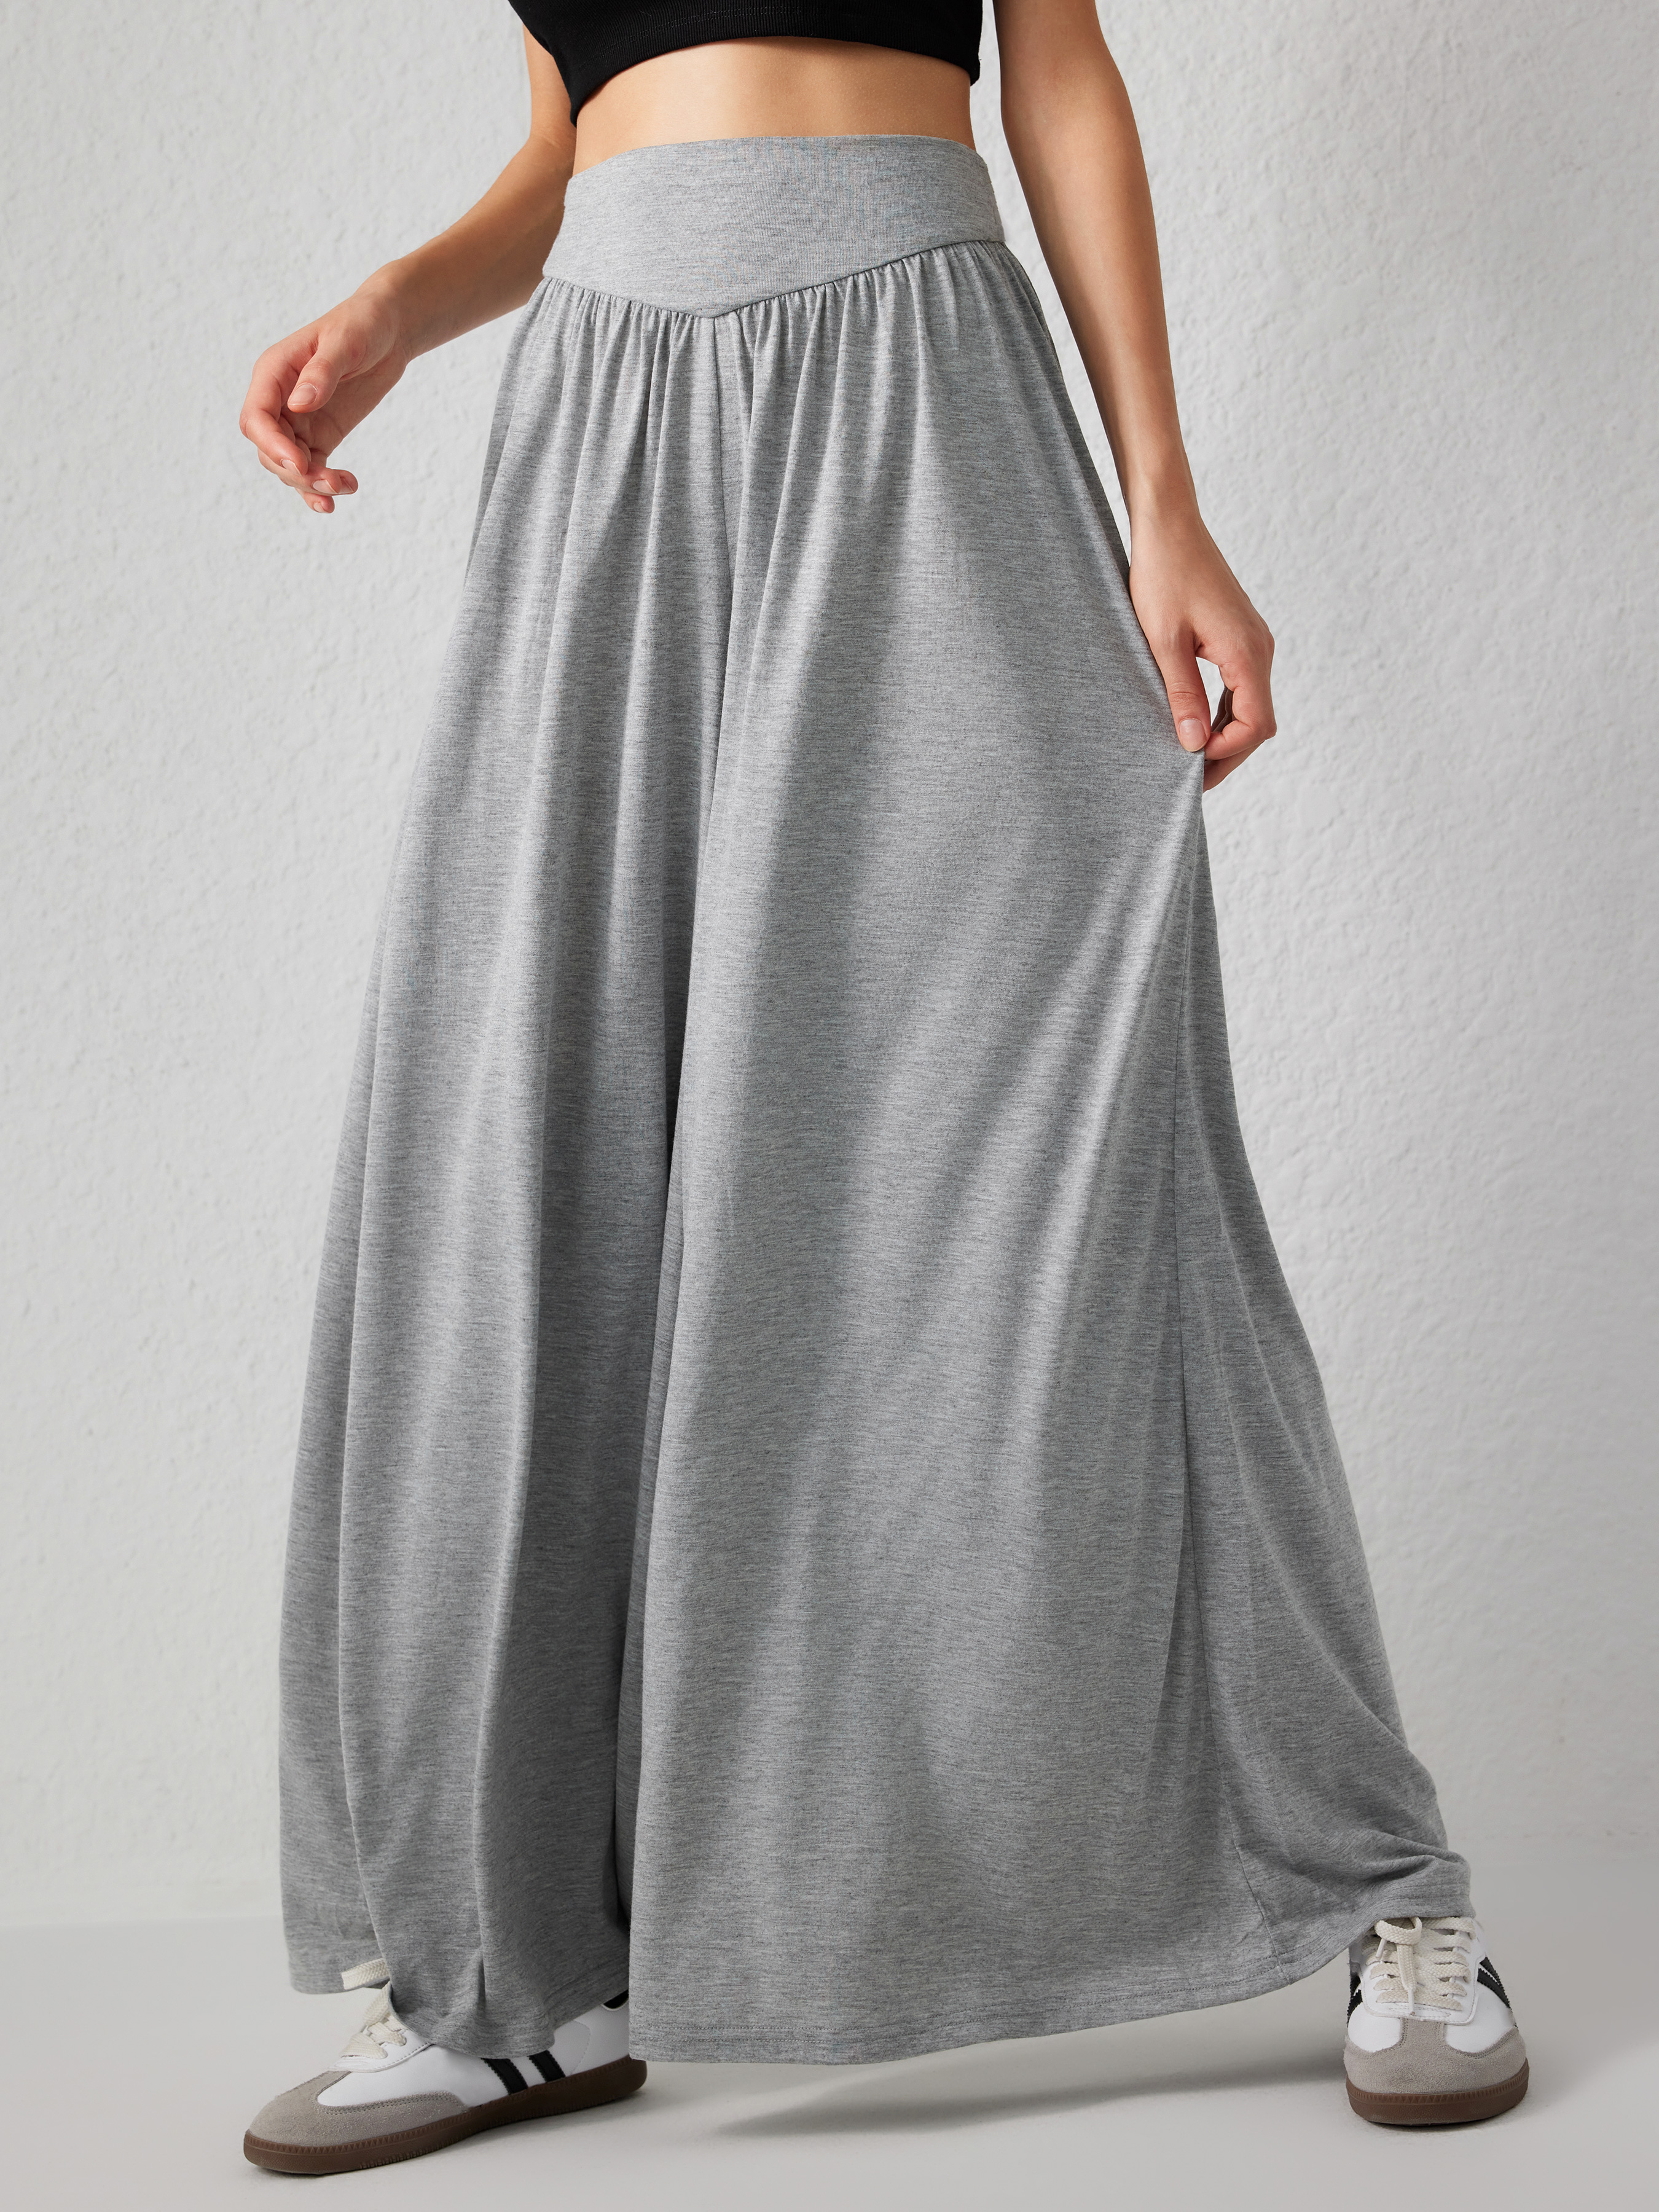 Sage Flowy Ruffle Edge Pants | Welcome to Bella Boutique!